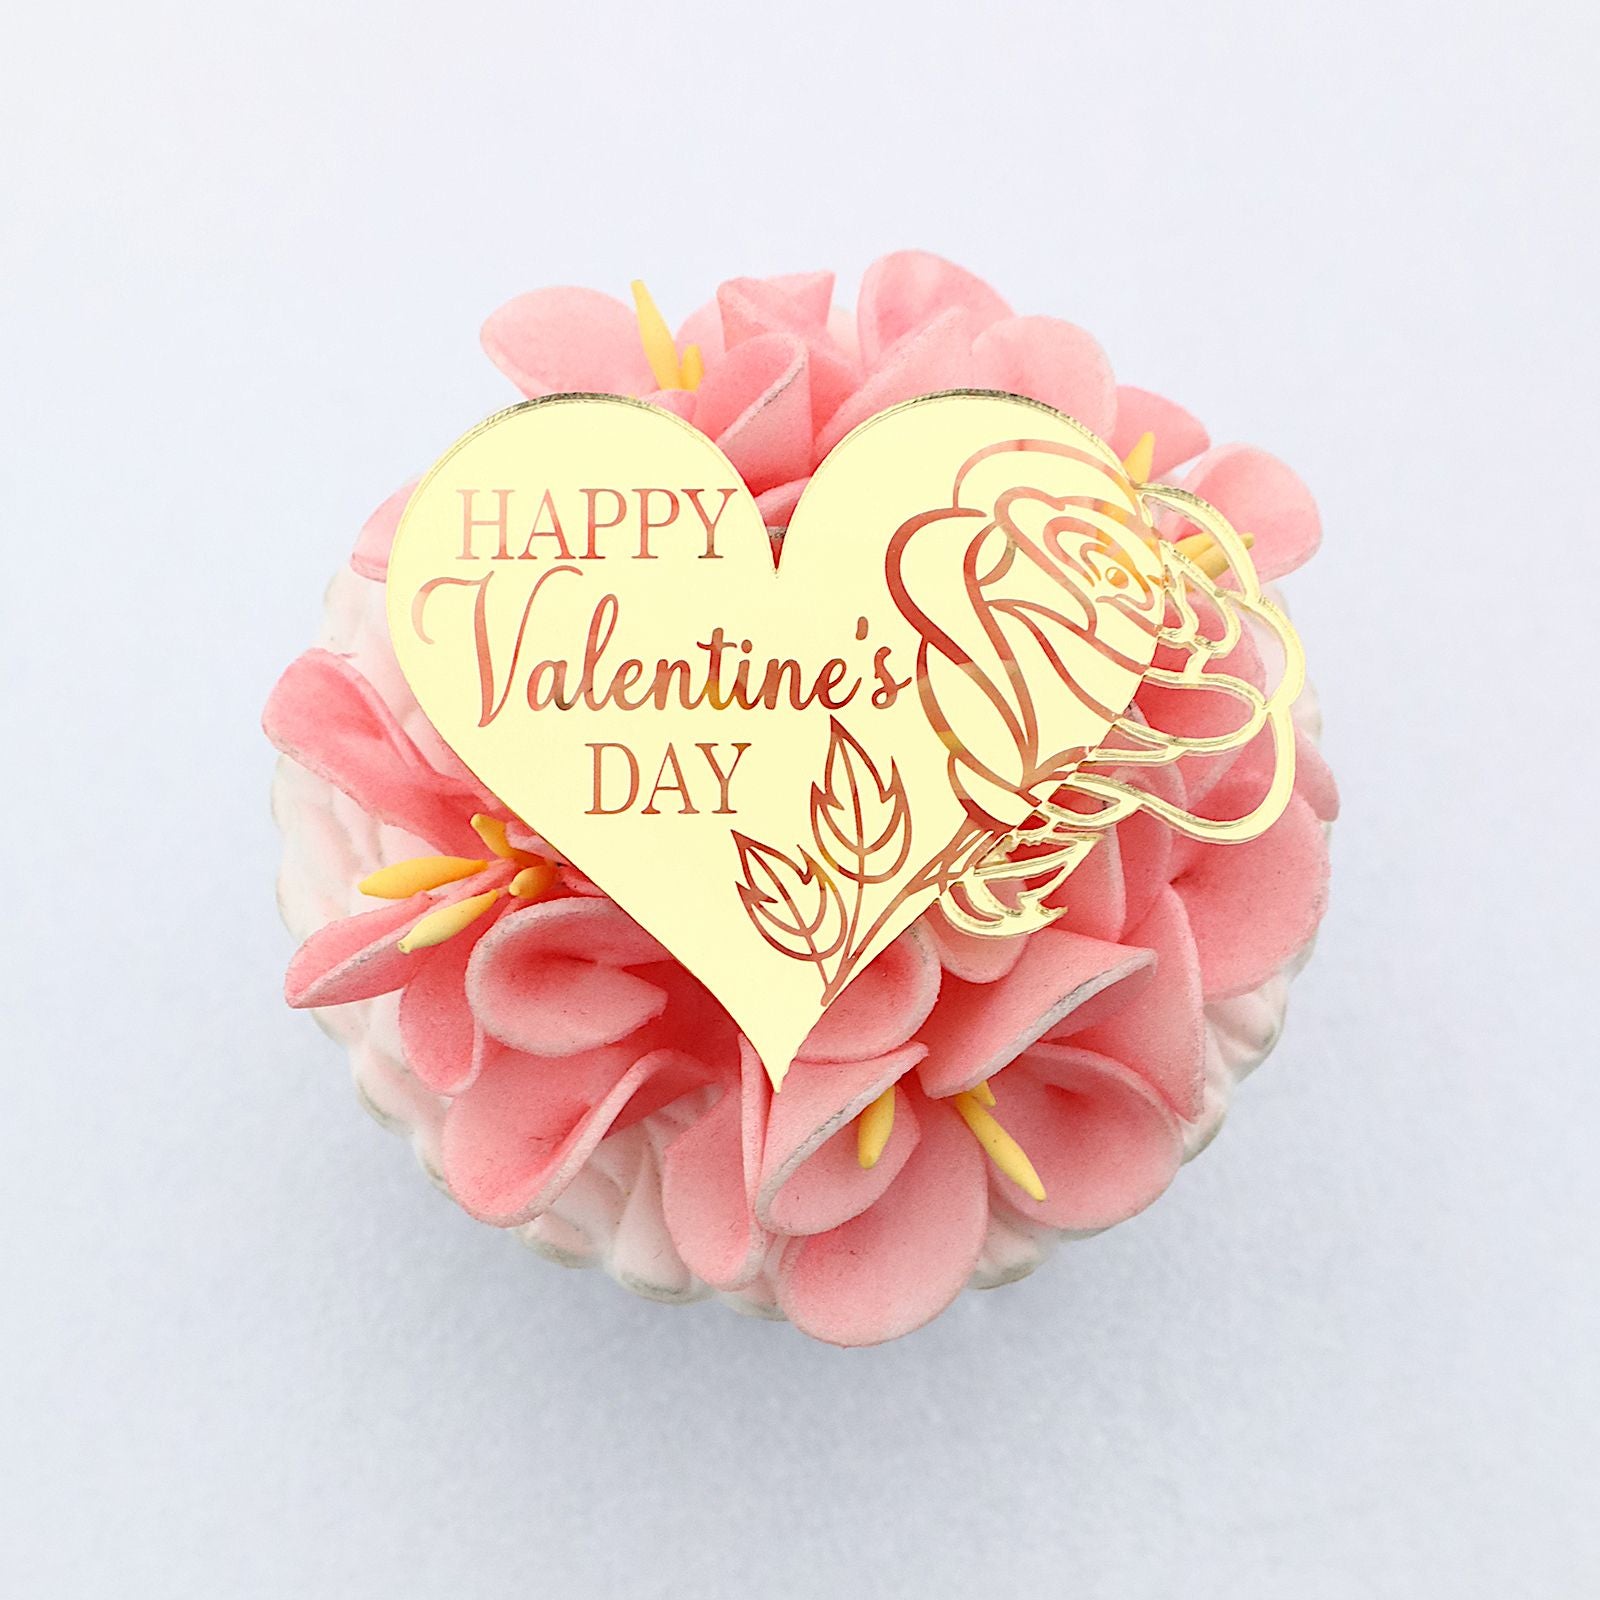 6x Valentine's Day Acrylic Cupcake Toppers Heart shaped Valentines toppers Love Valentine Toppers